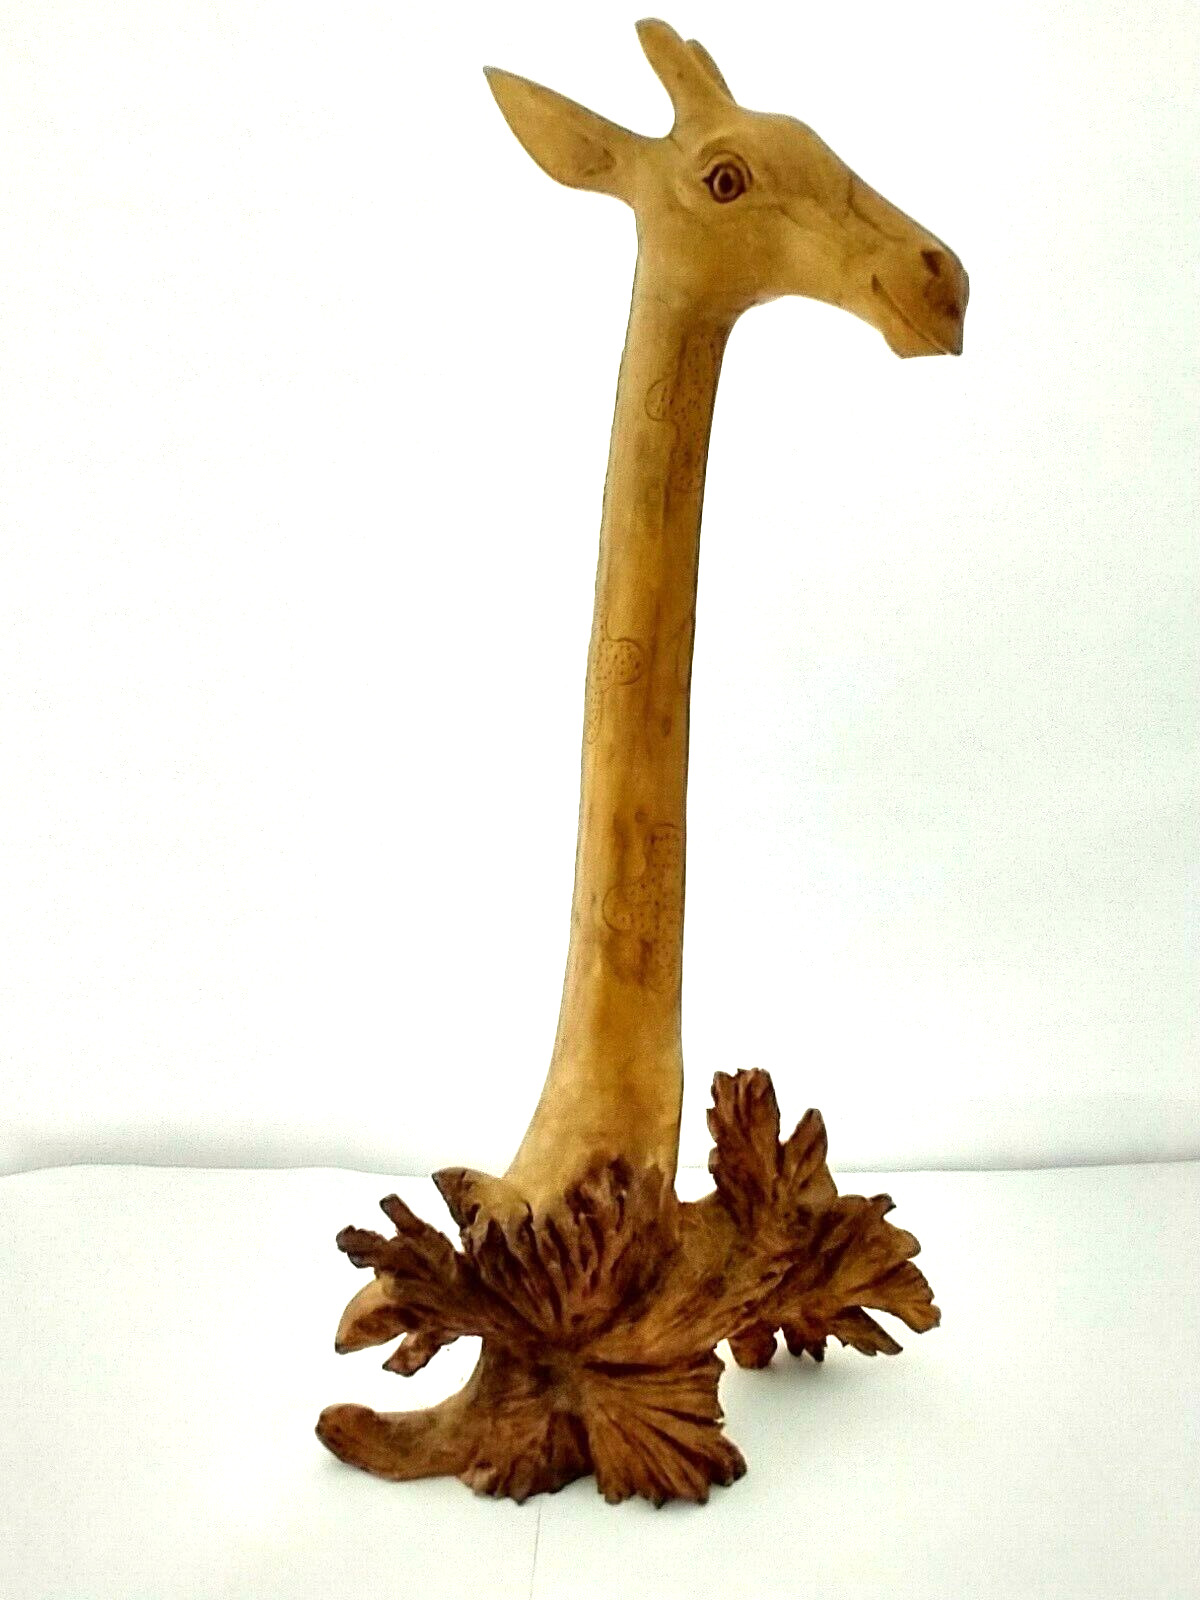 Carved Detailed Wood Giraffe with natural finish, stands 11 inches high